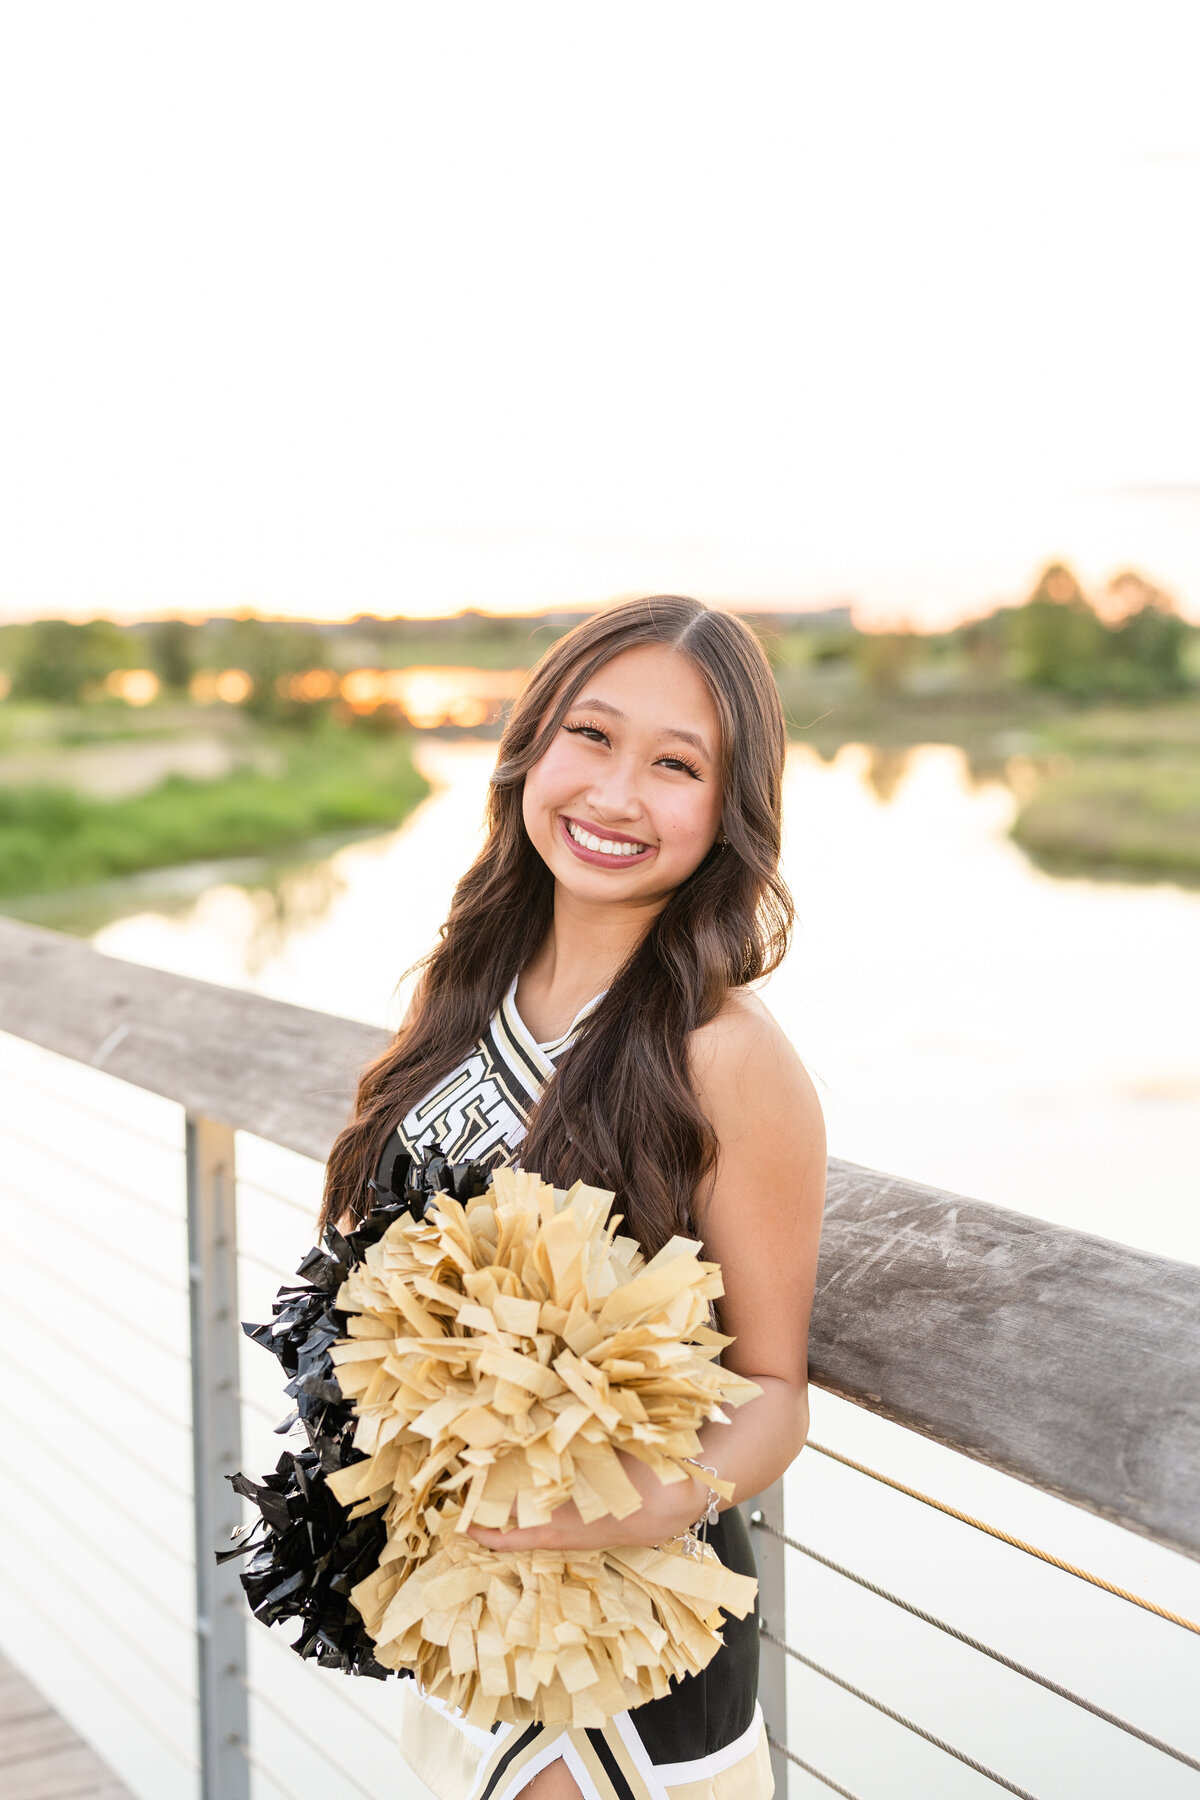 Houston High School senior girl in cheerleading outfit smiling while holding poms and leaning against bridge at Josey Lake Park